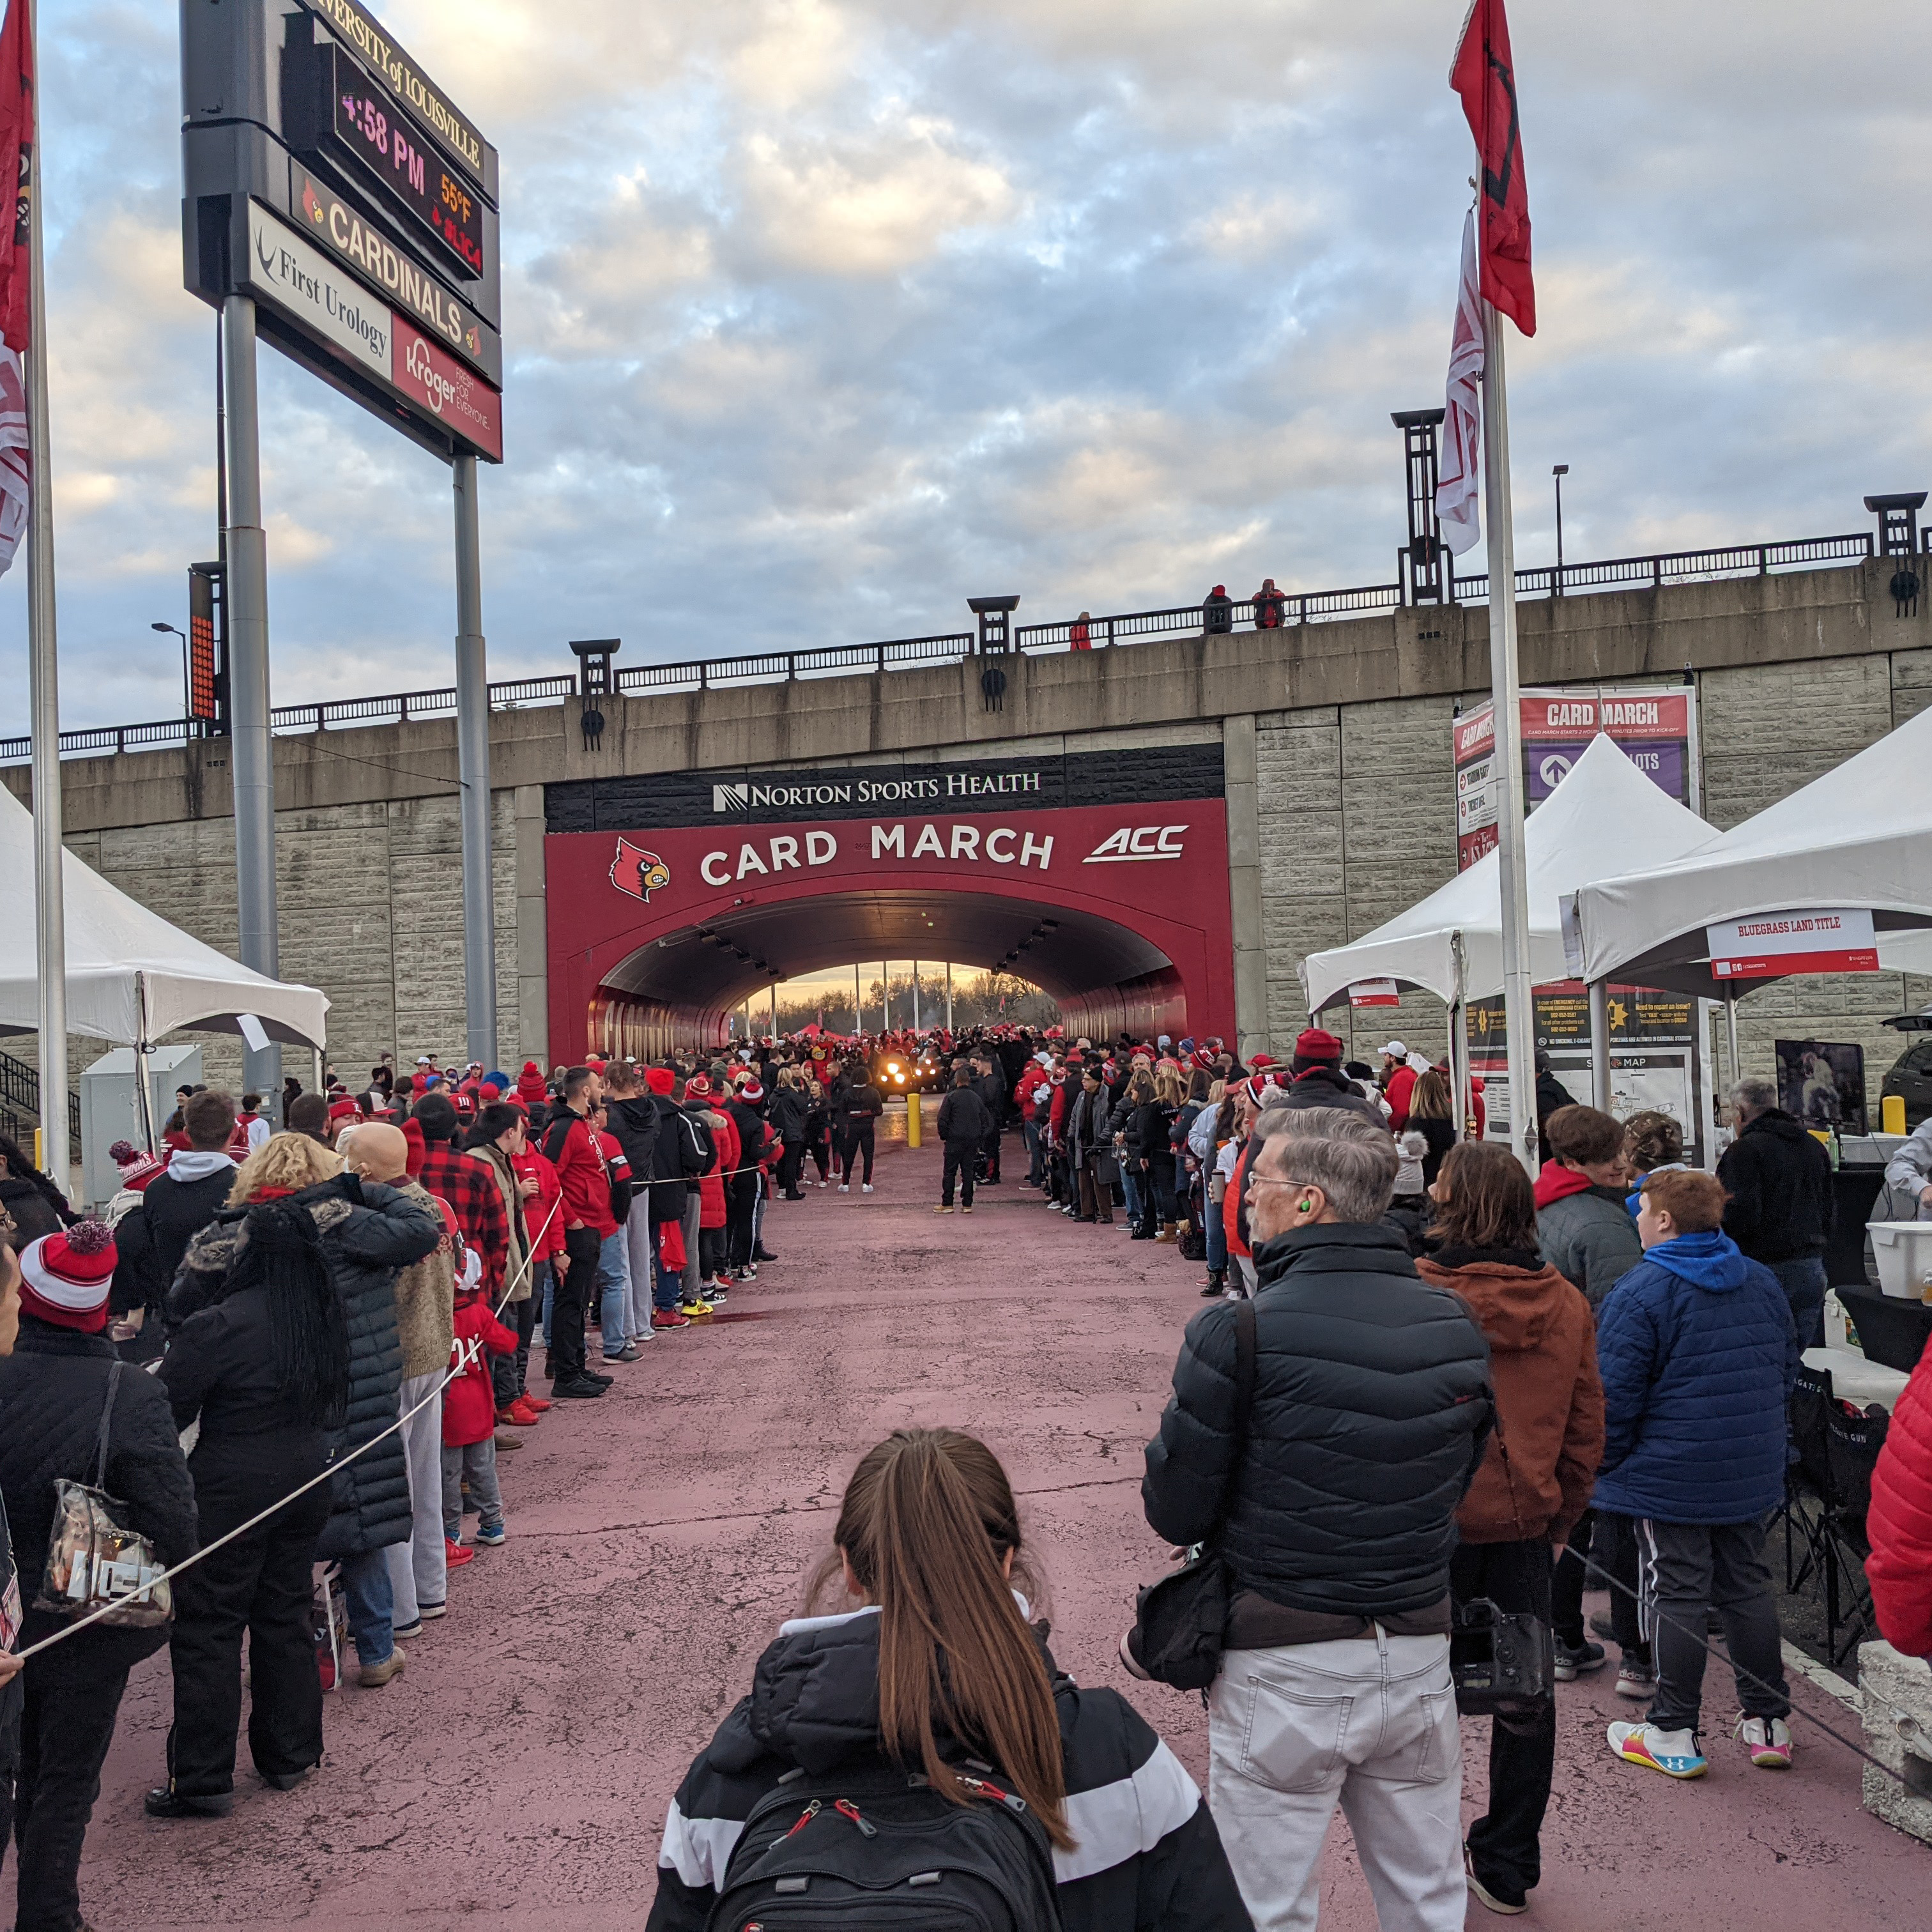 Tailgate Guys and UofL to bring Card March Premium Reserved